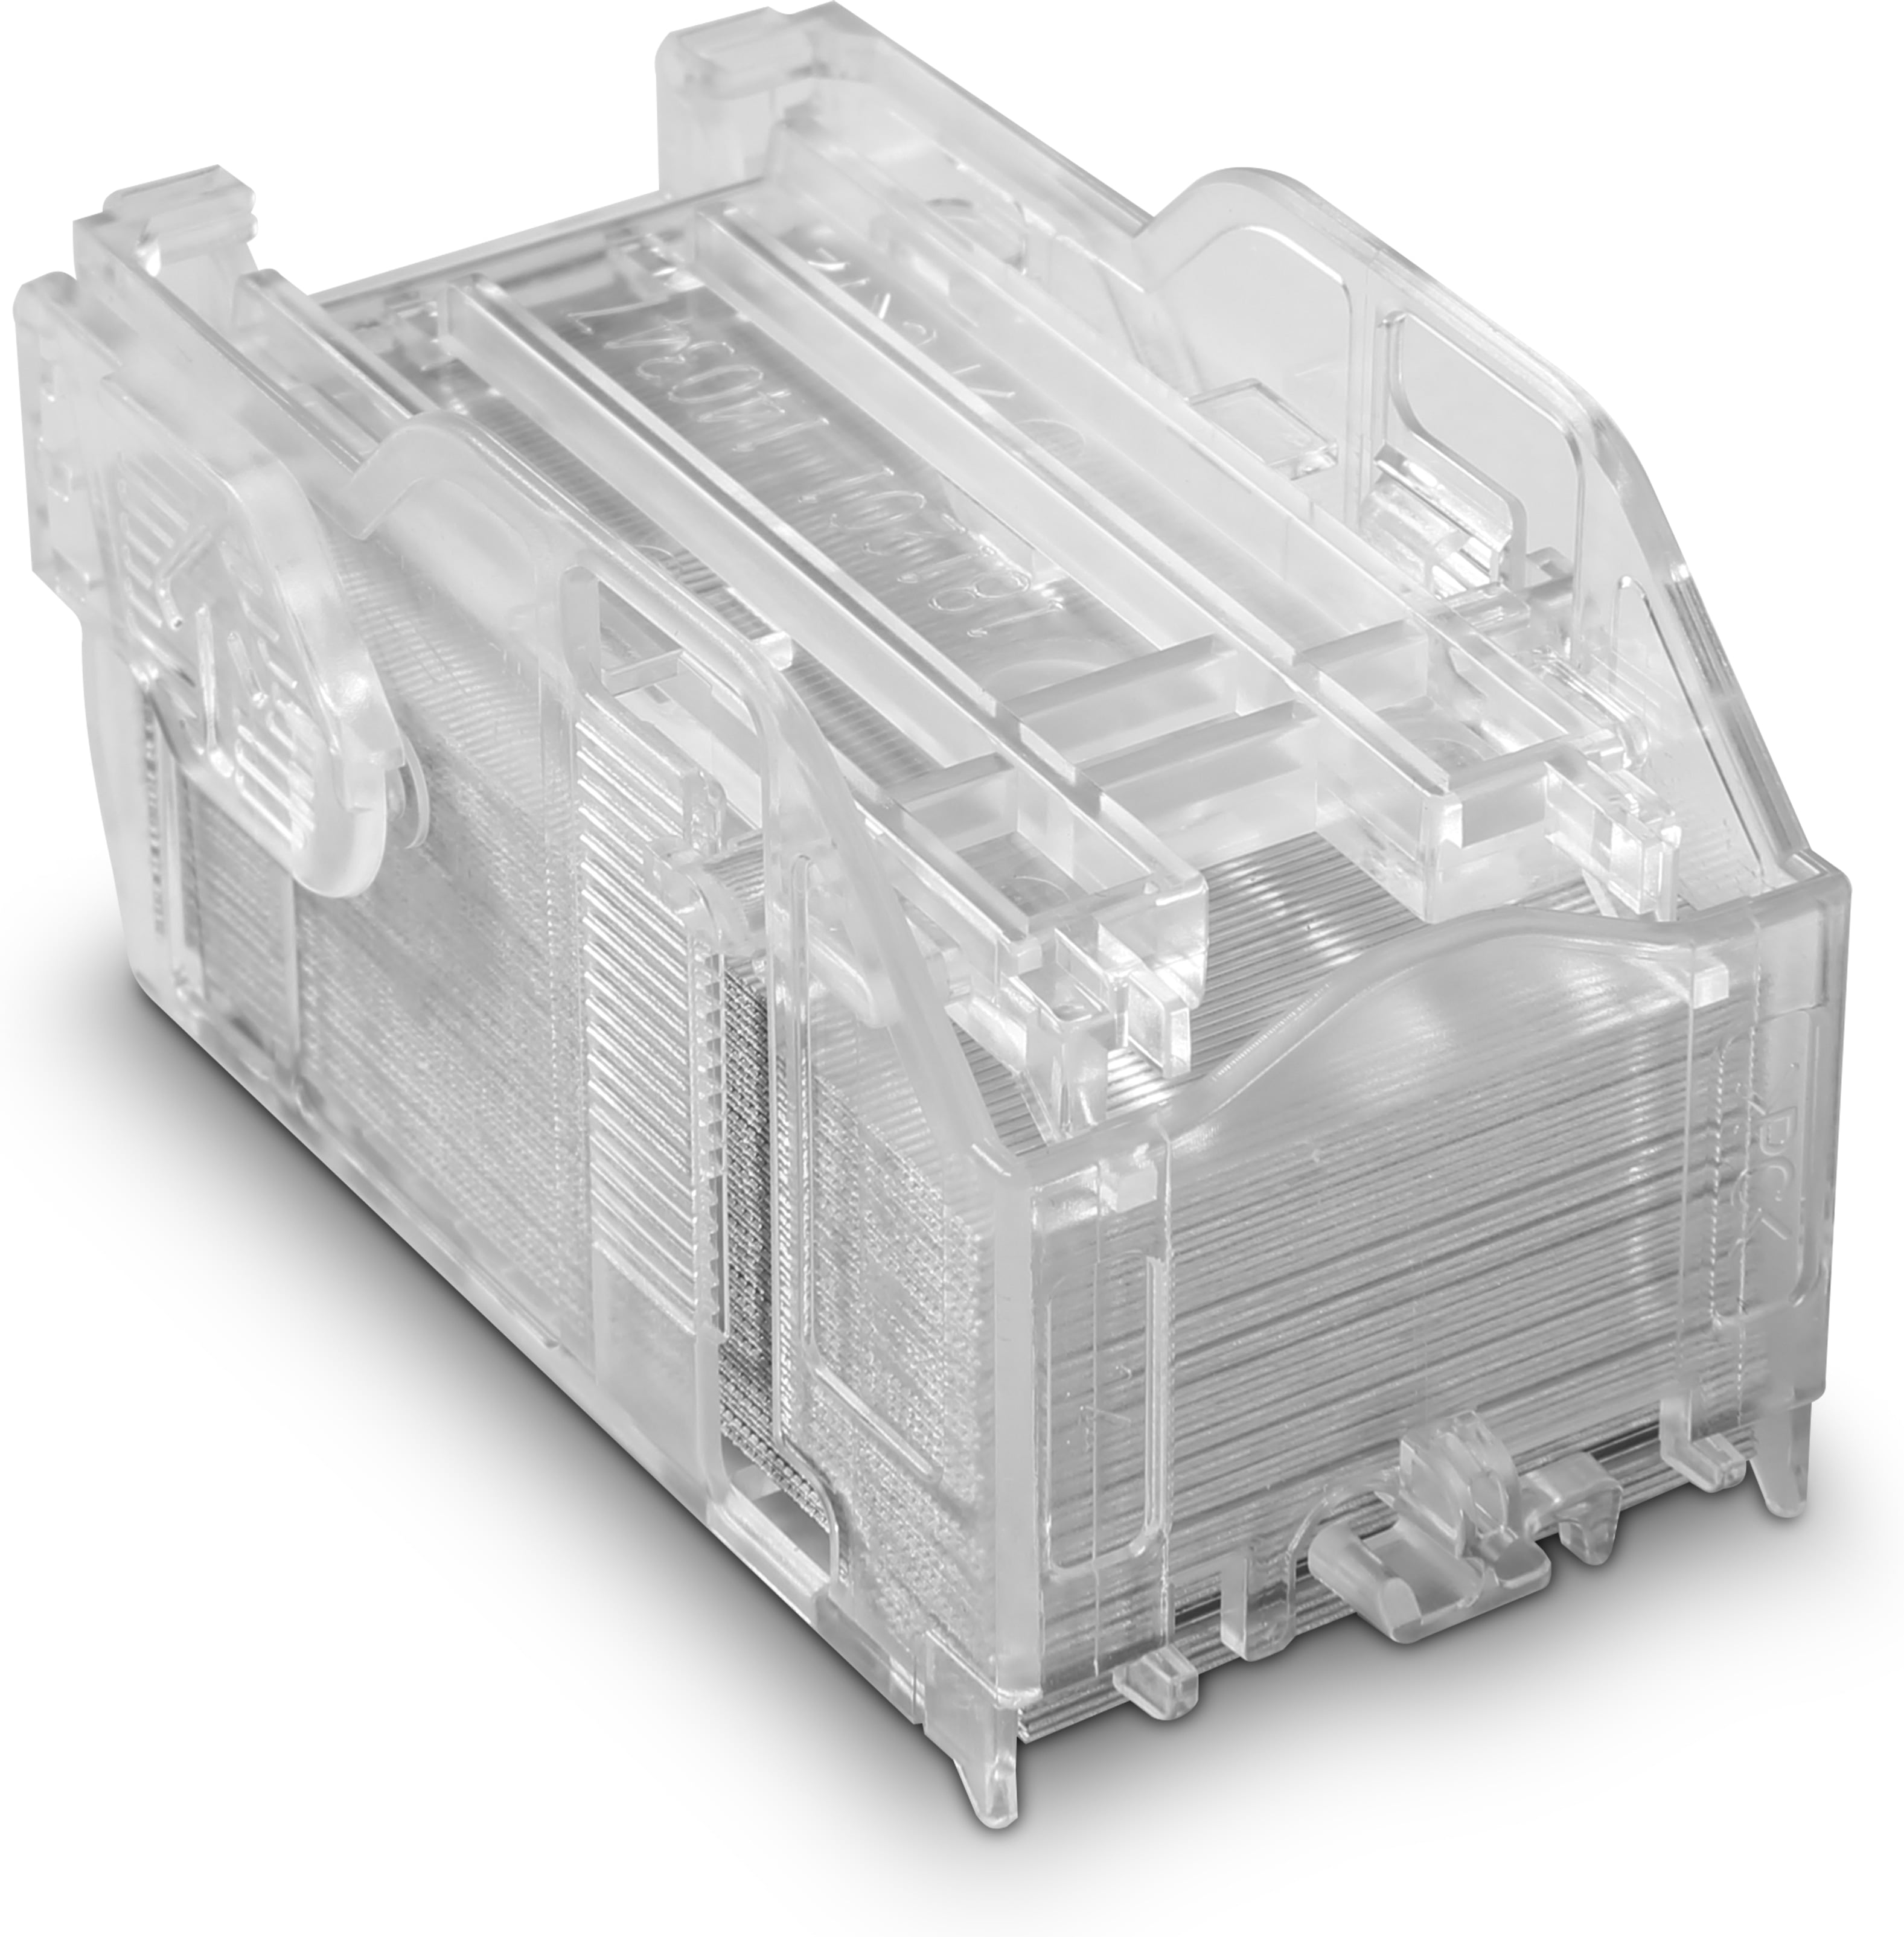 HP Staple Cartridge C8091A With 5000 Staples for sale online 